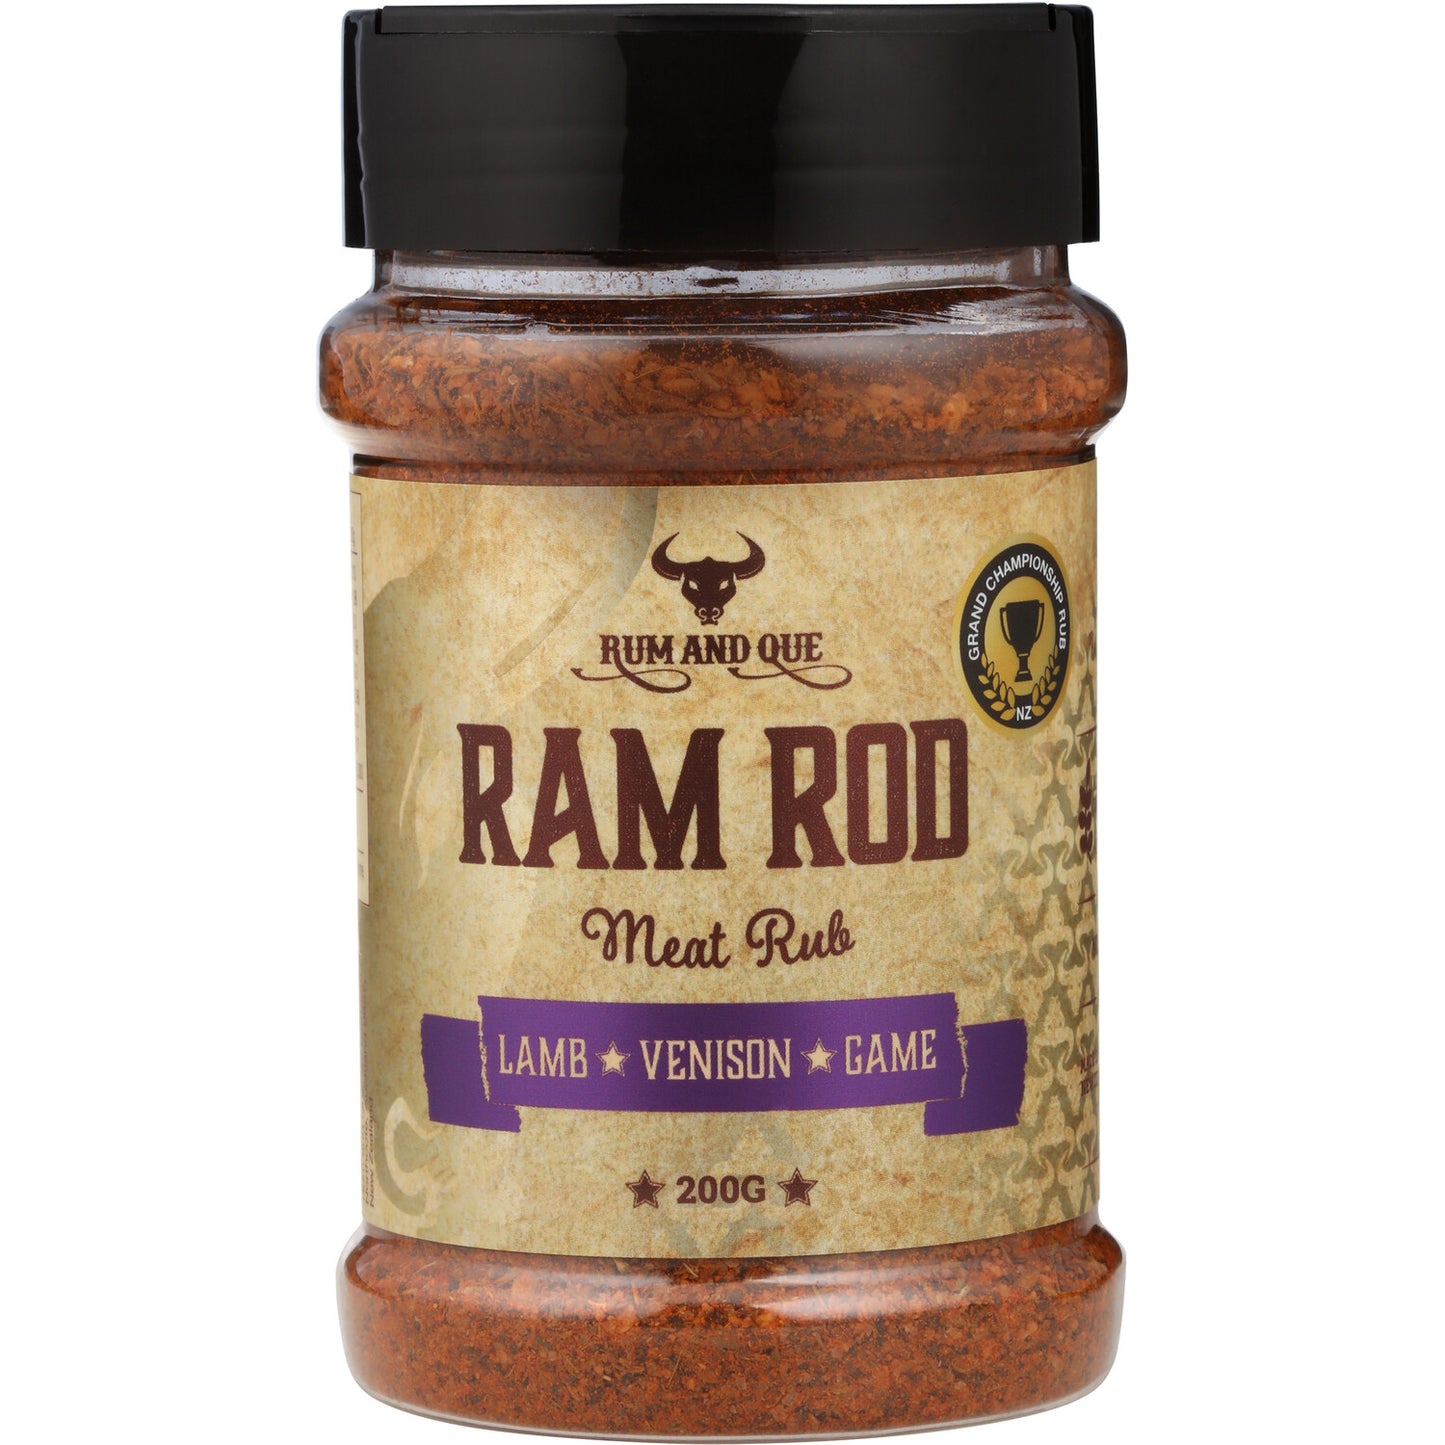 Rum and Que Ram Rod - Shaker 200g